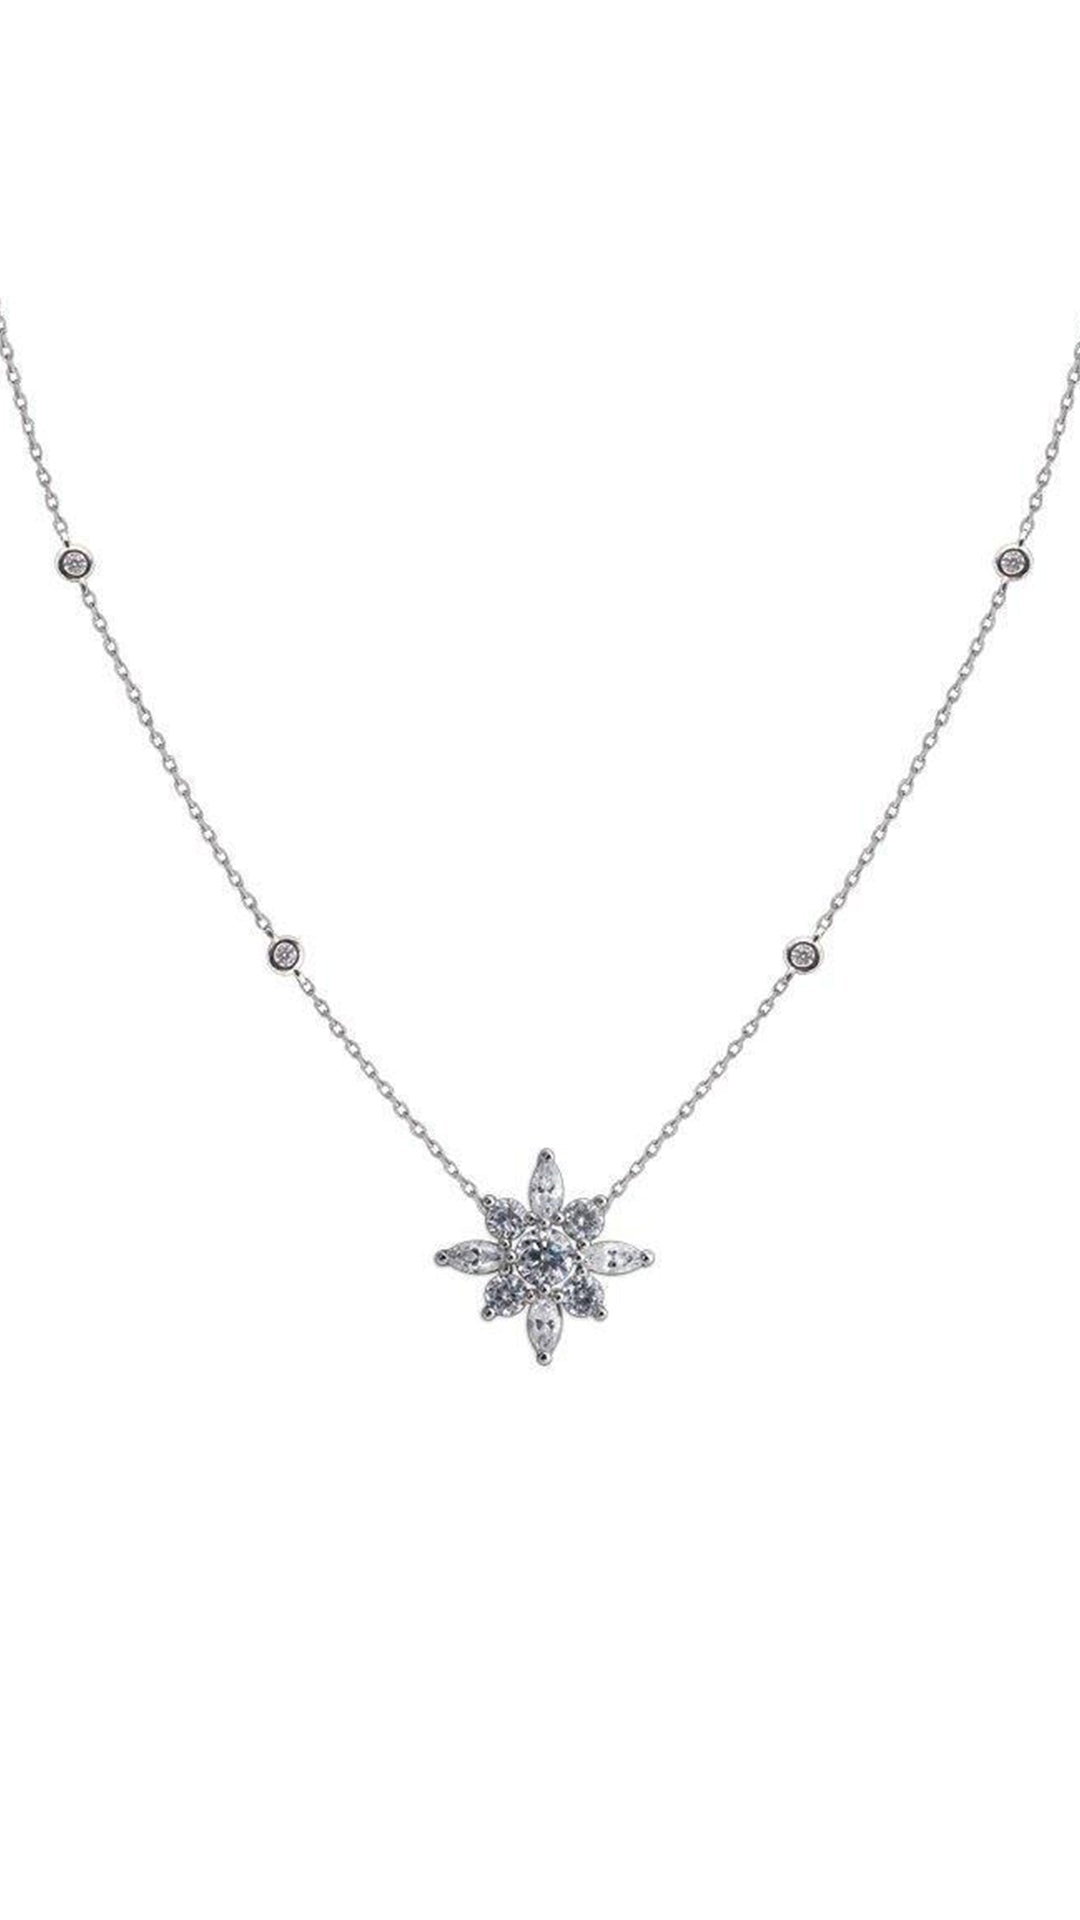 Camelia Necklace White Gold Plated